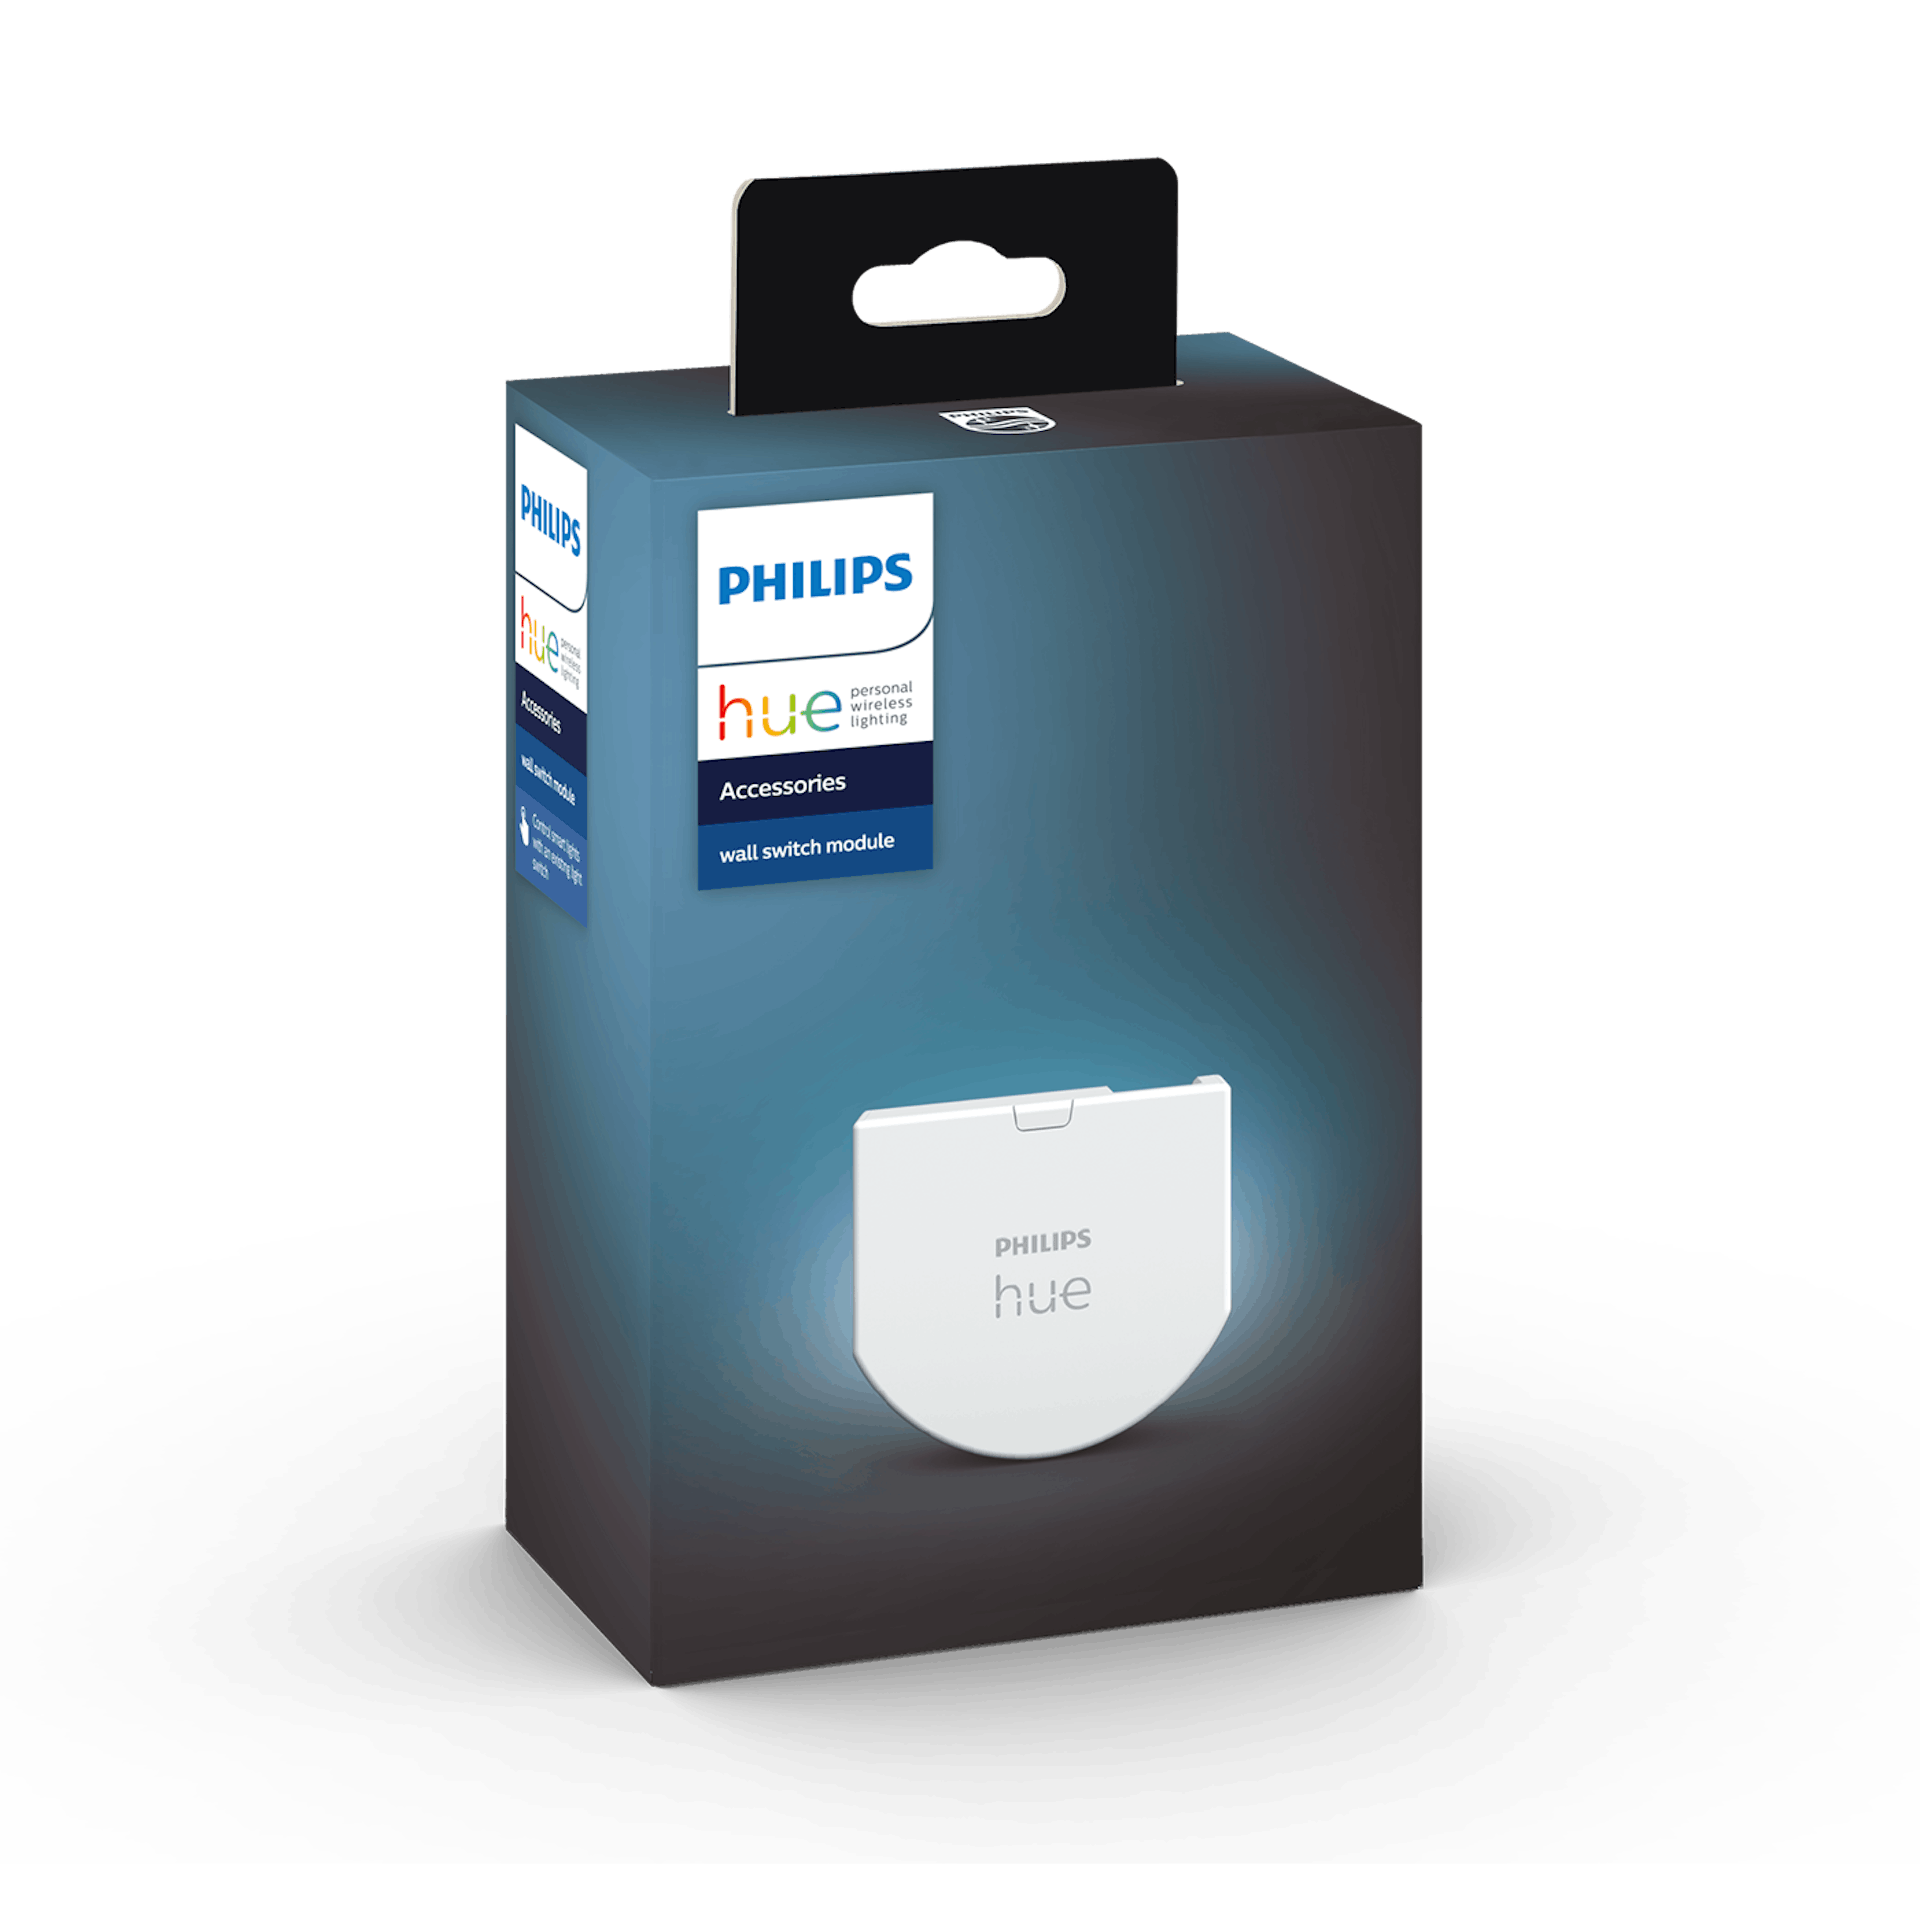 Philips Hue Wall Switch Module - Packaging image